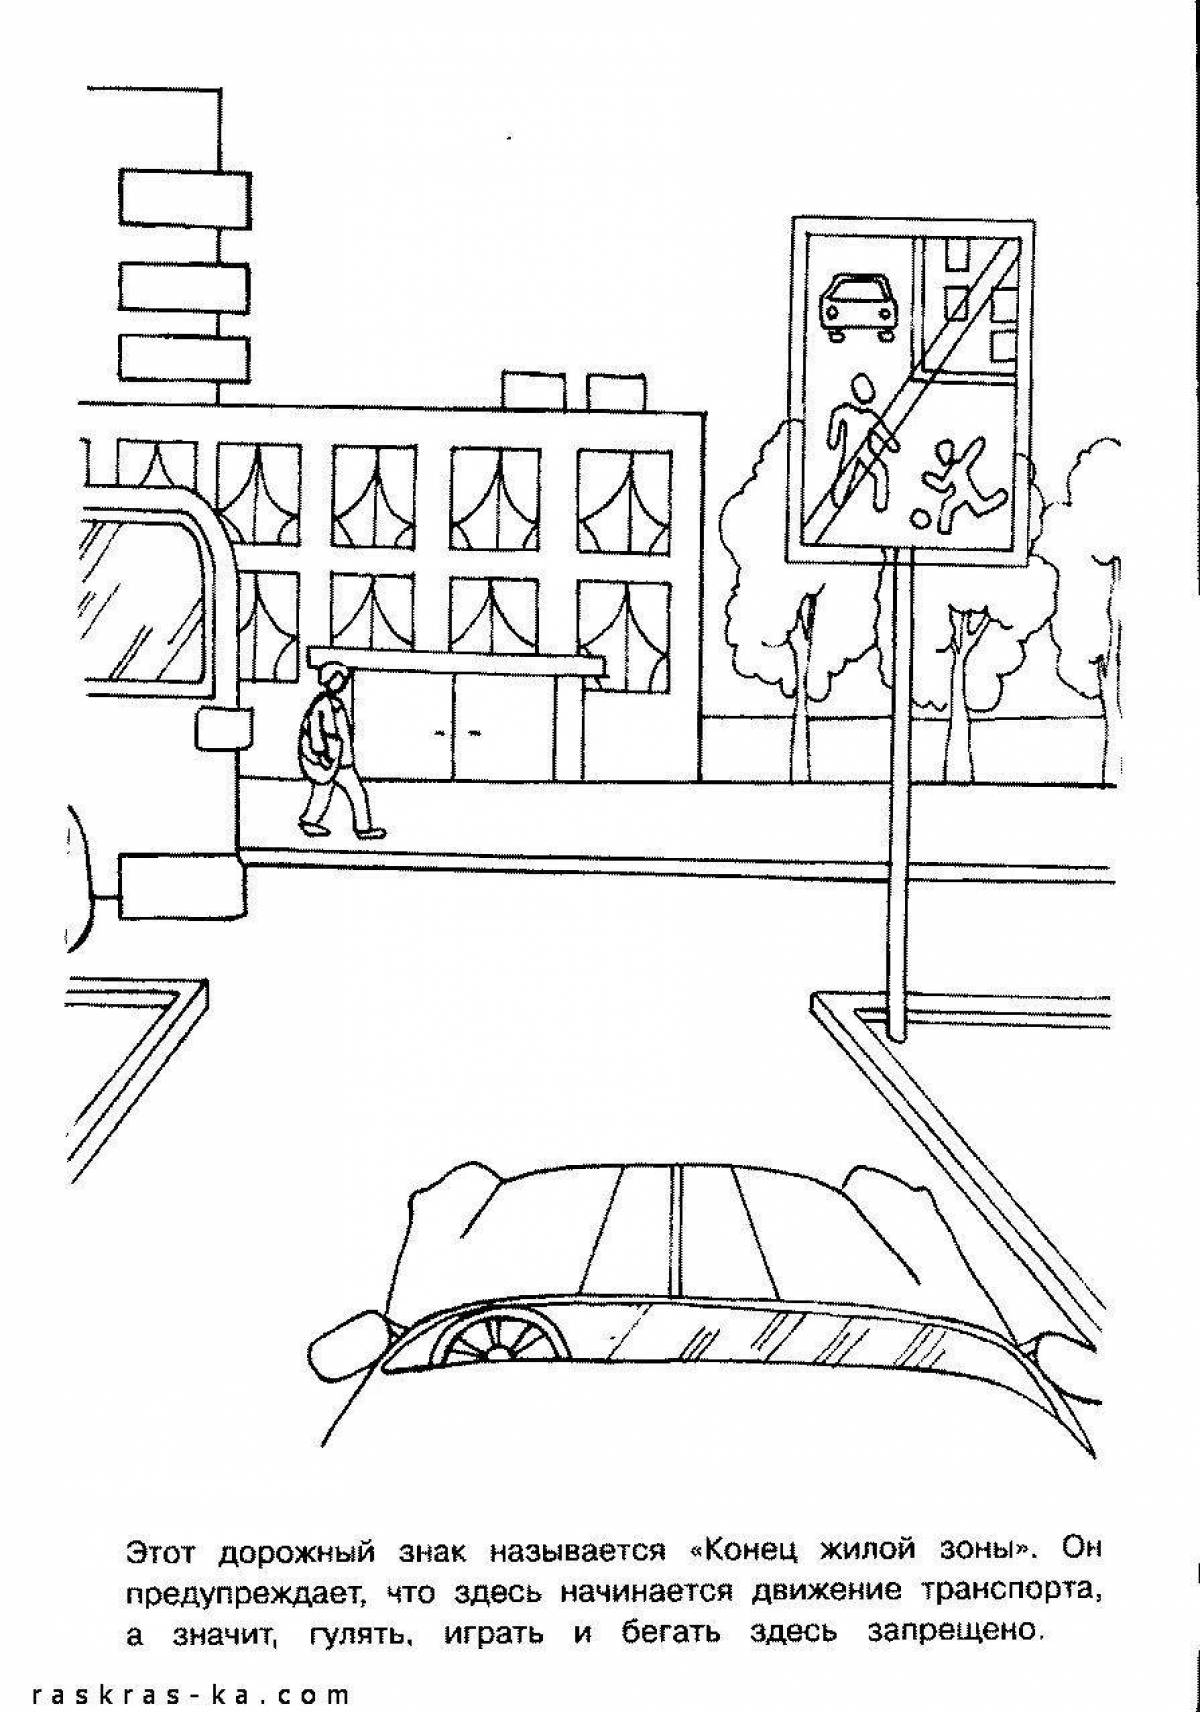 Attractive traffic safety coloring page